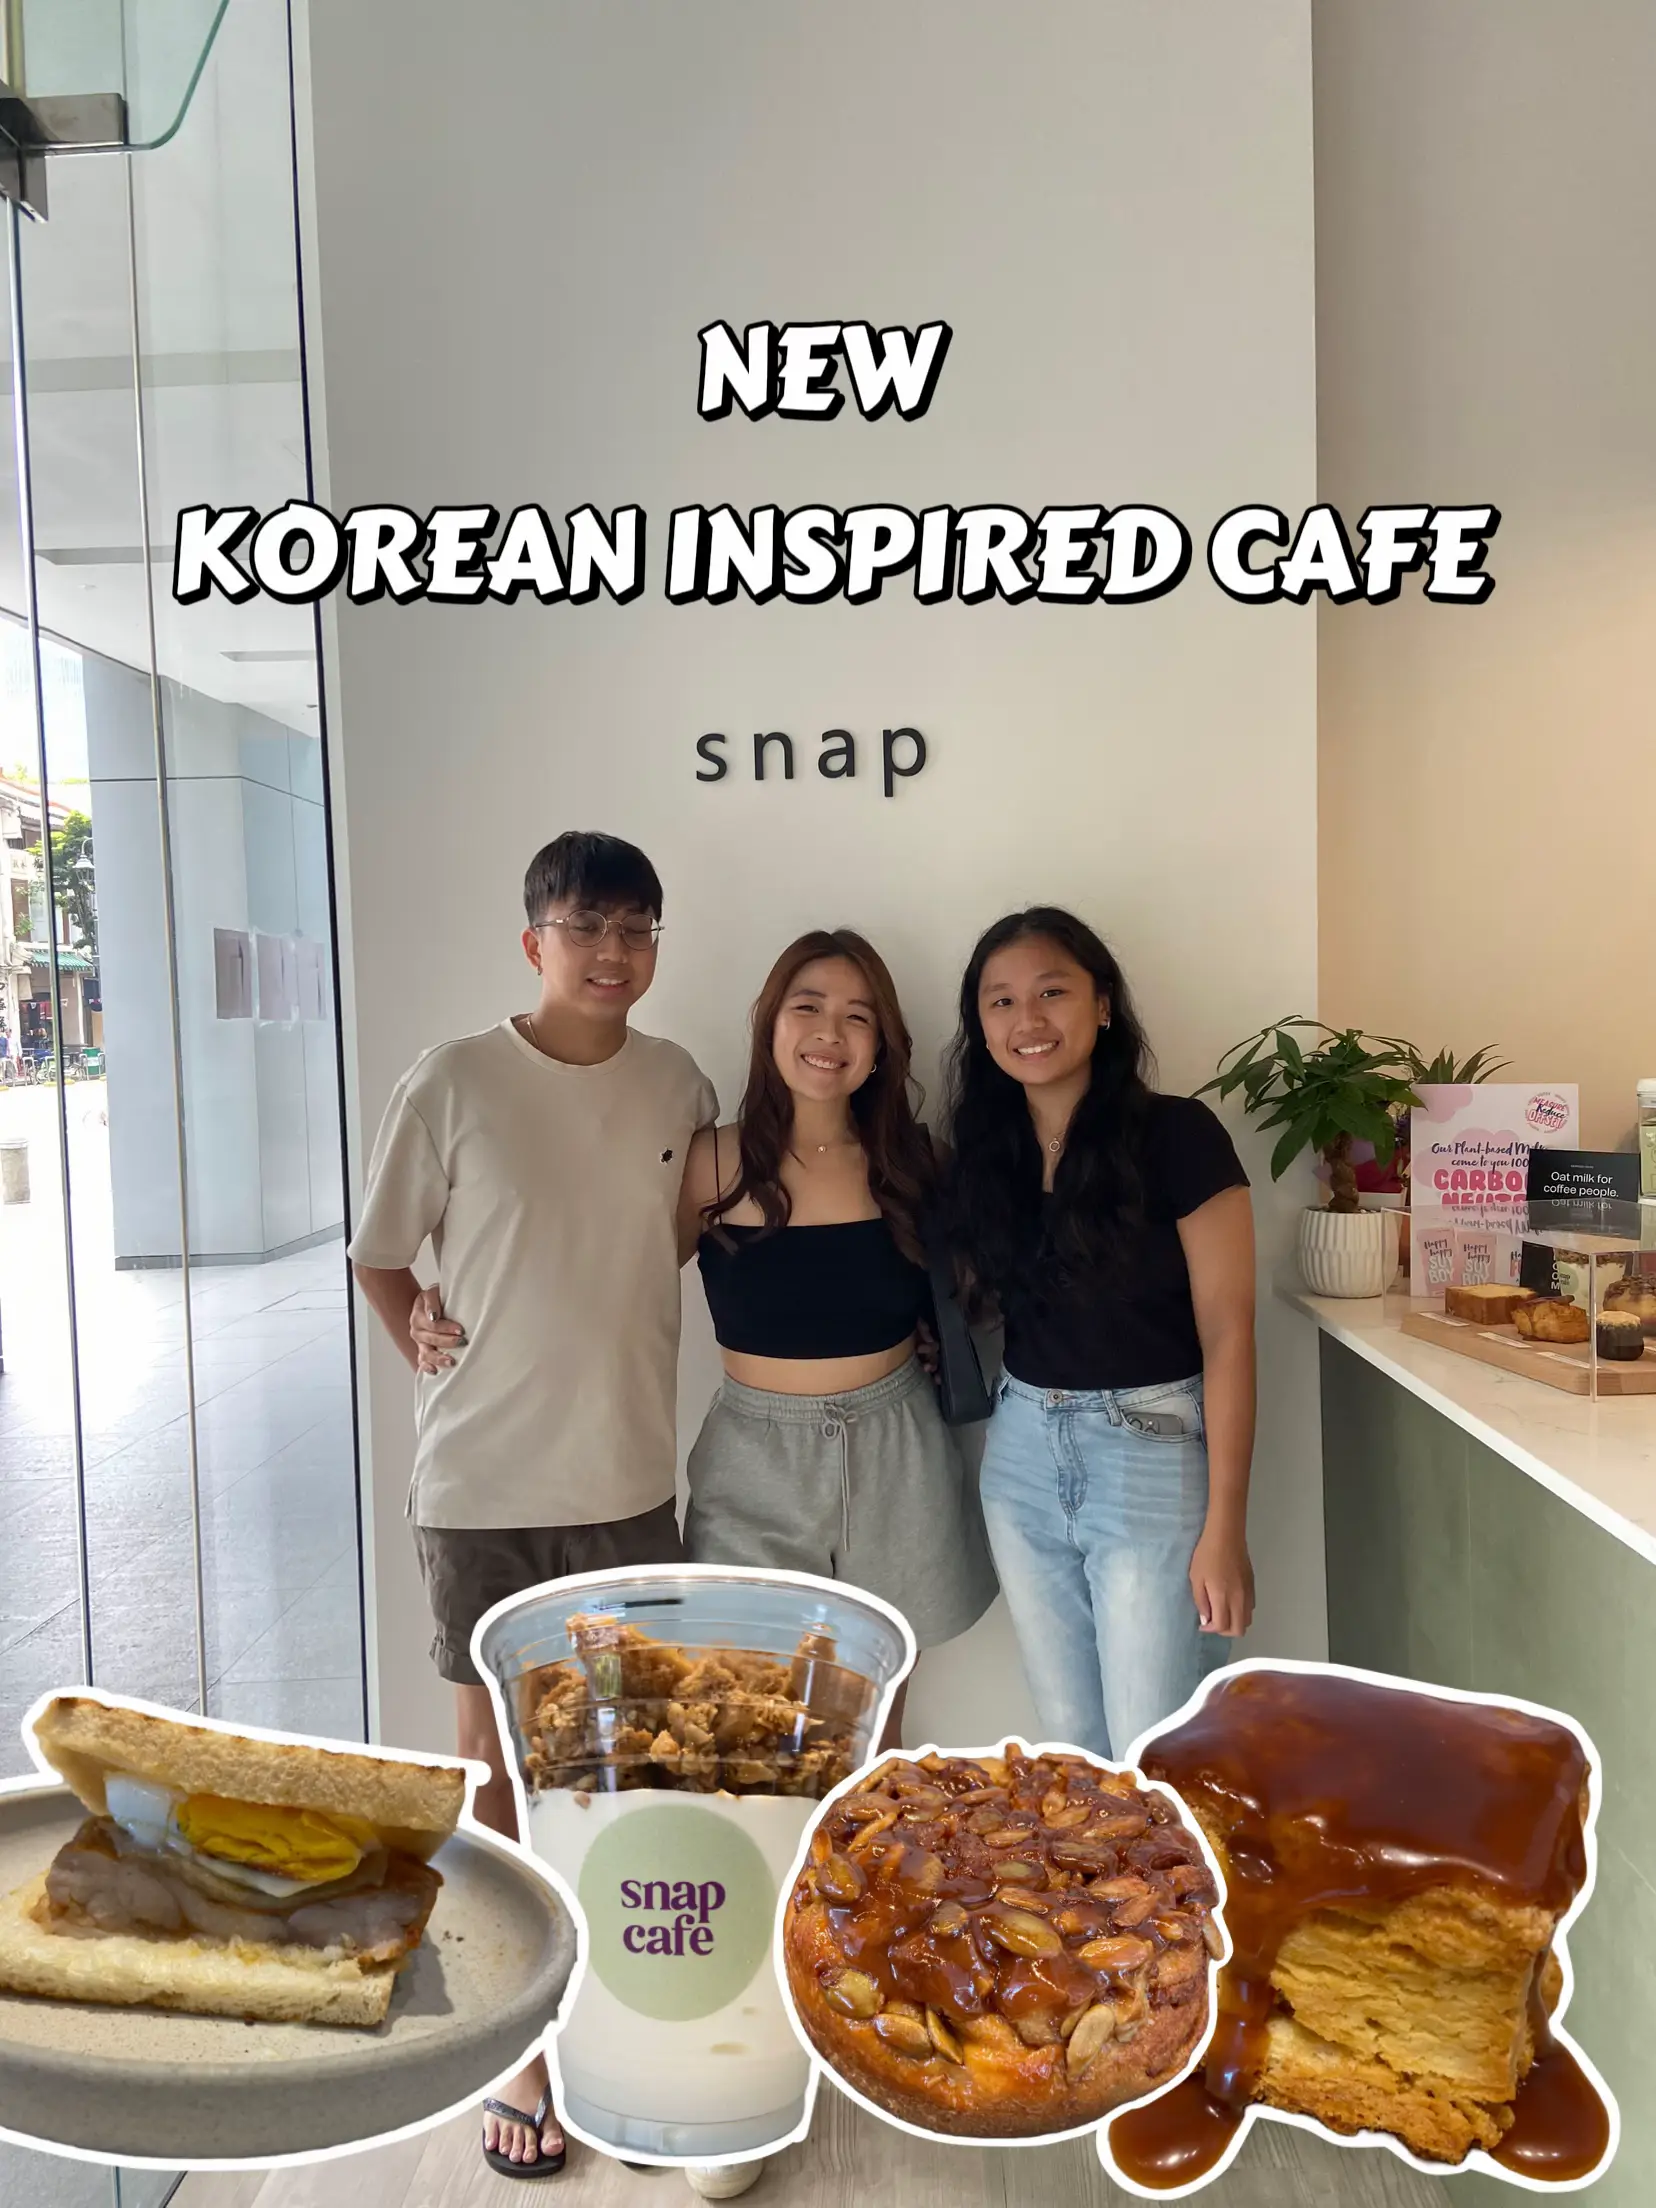 SNAP - NEW KOREAN INSPIRED CAFE 's images(0)